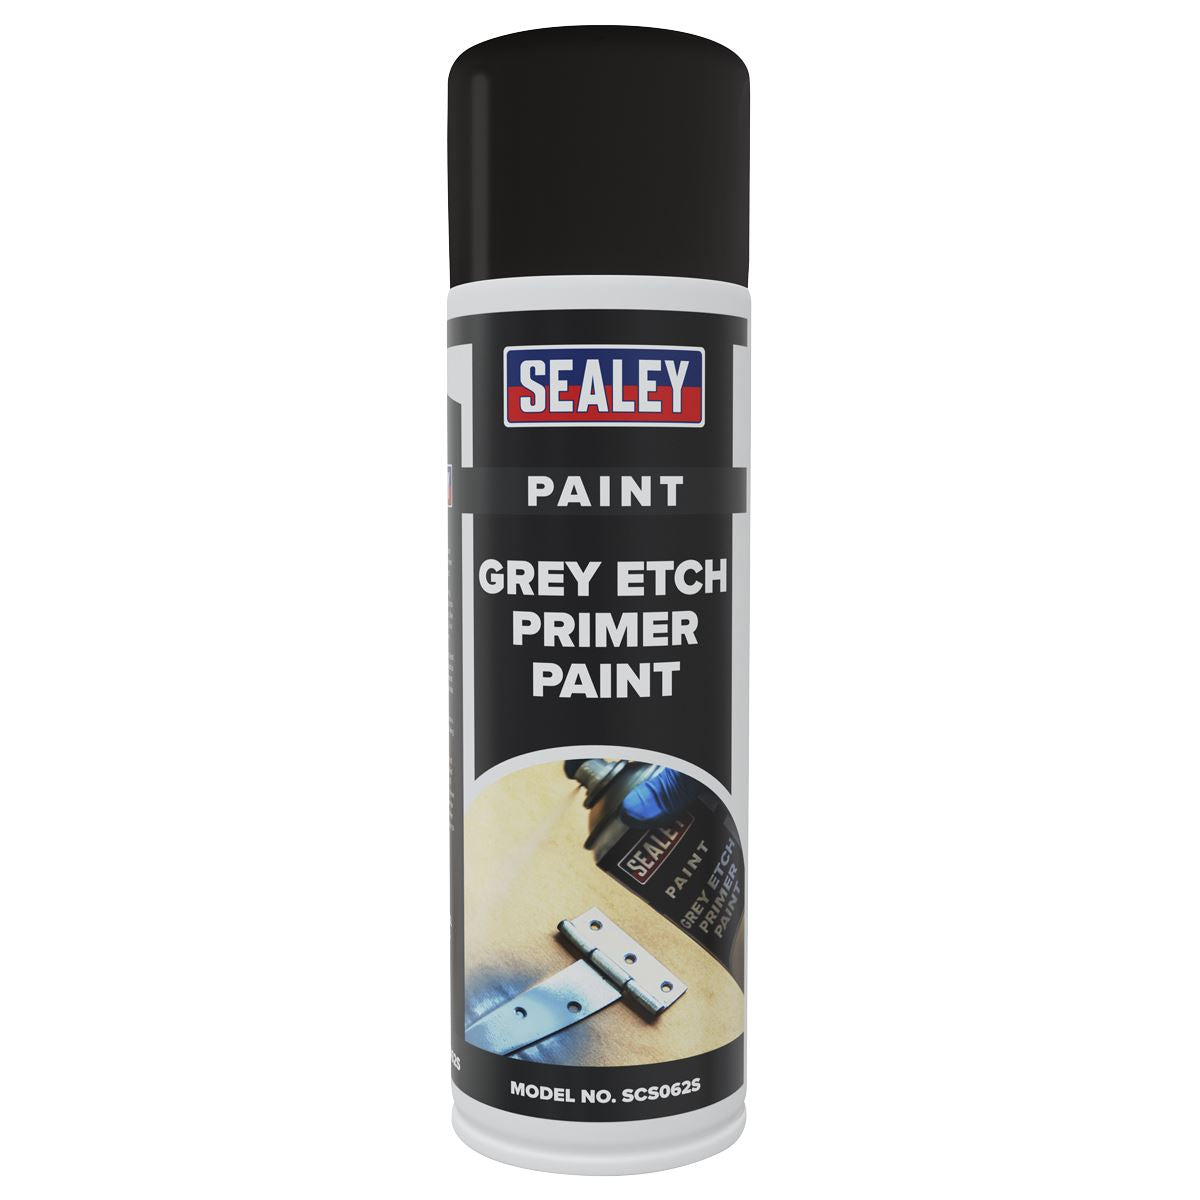 Sealey Grey Etch Primer Paint 500ml - Pack of 6